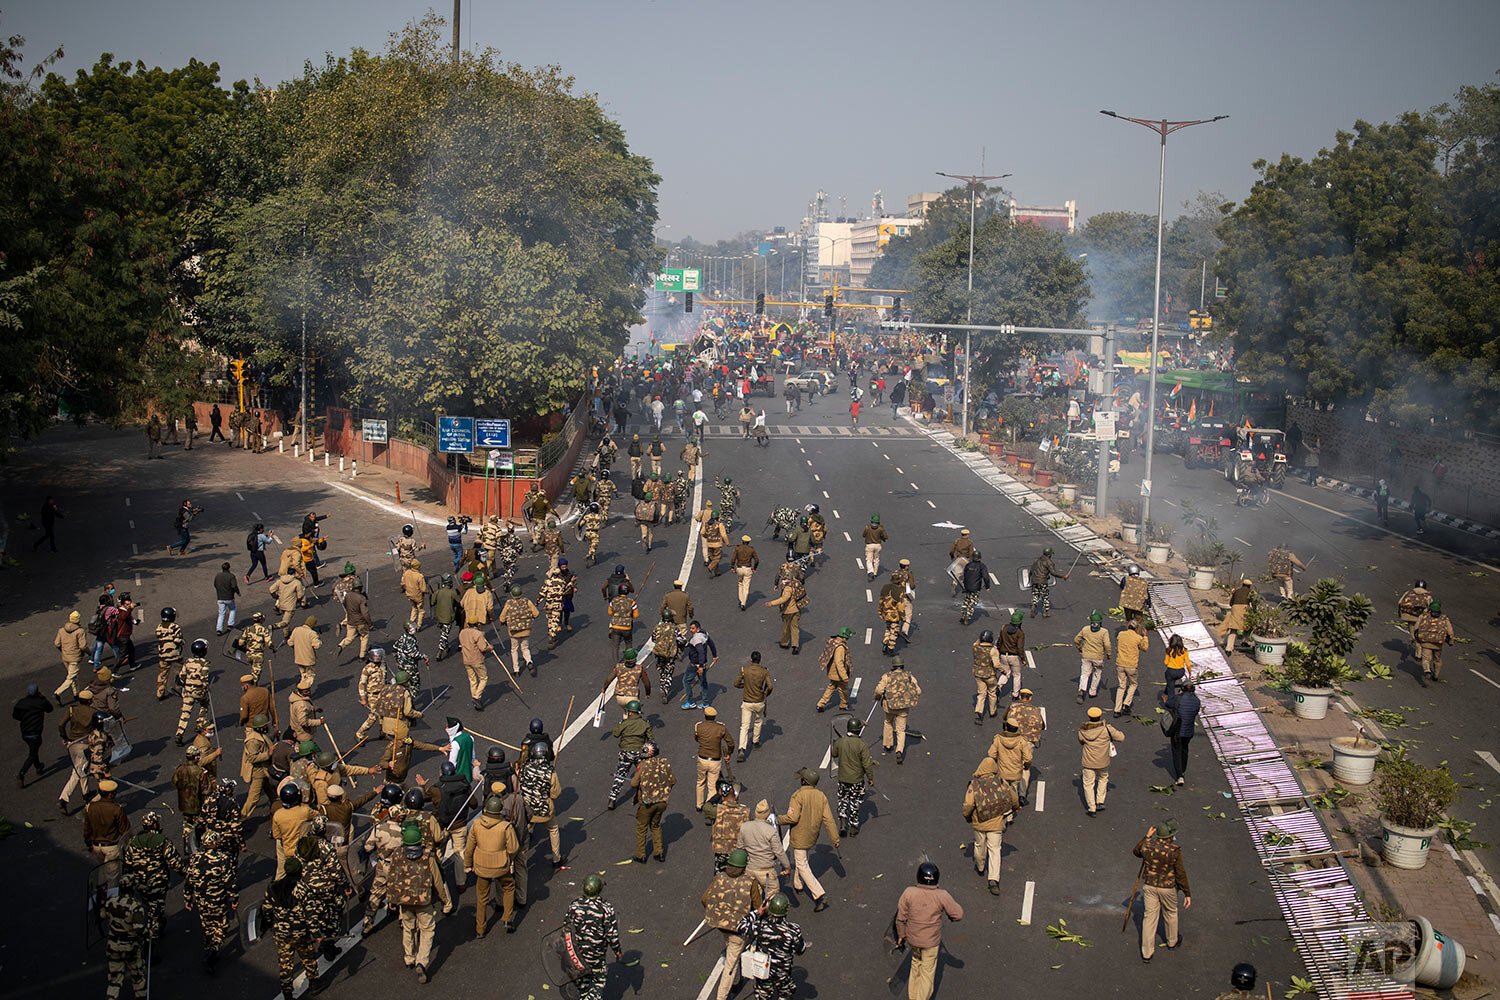  Indian police chase protesting farmers away as they march to the capital breaking police barricades during India's Republic Day celebrations in New Delhi, India, Tuesday, Jan. 26, 2021. (AP Photo/Altaf Qadri) 